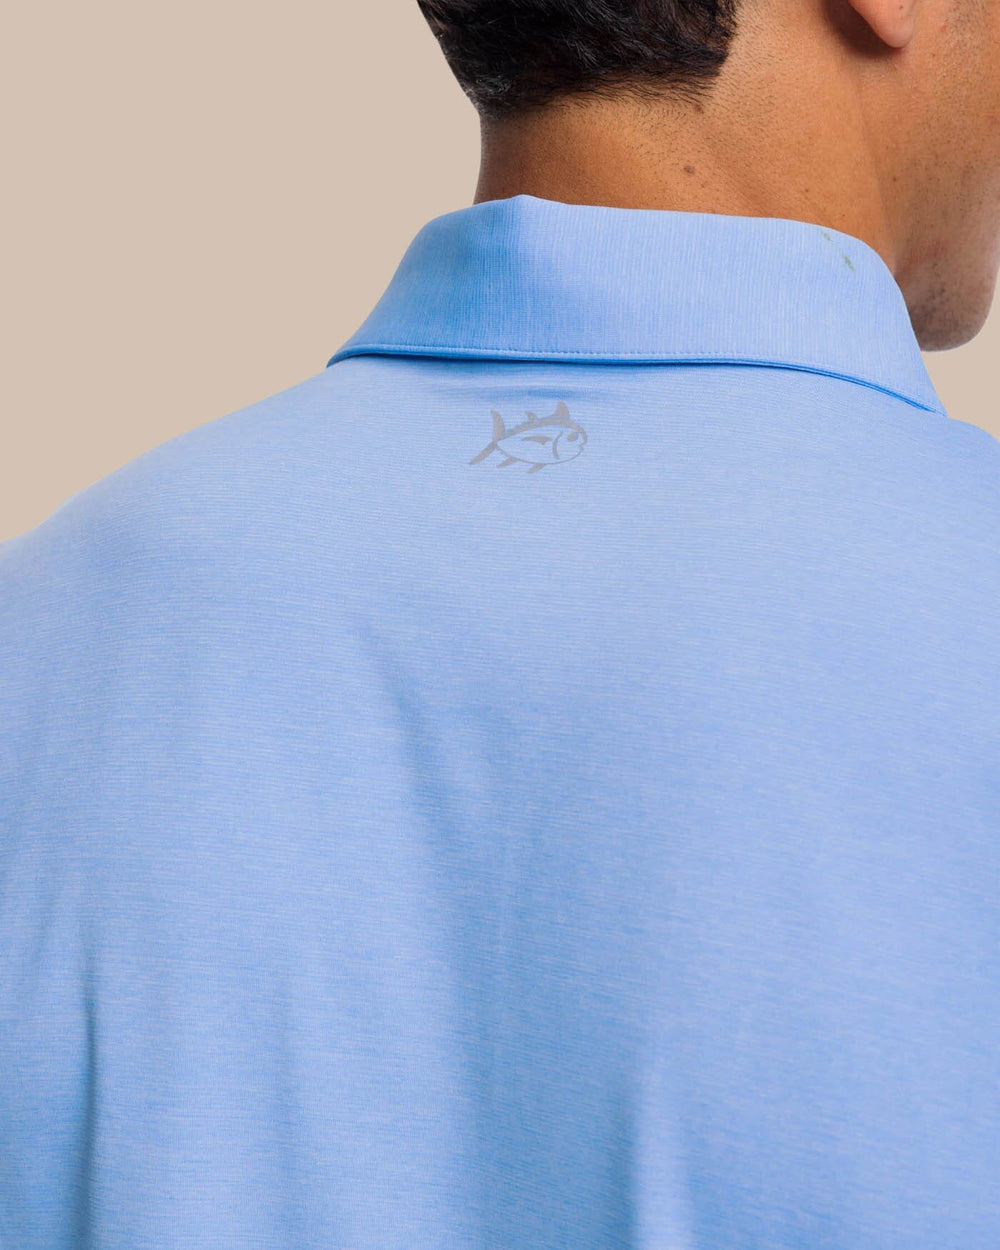 The yoke view of the brrr°®-eeze Heather Performance Polo Shirt by Southern Tide - Heather Ocean Channel